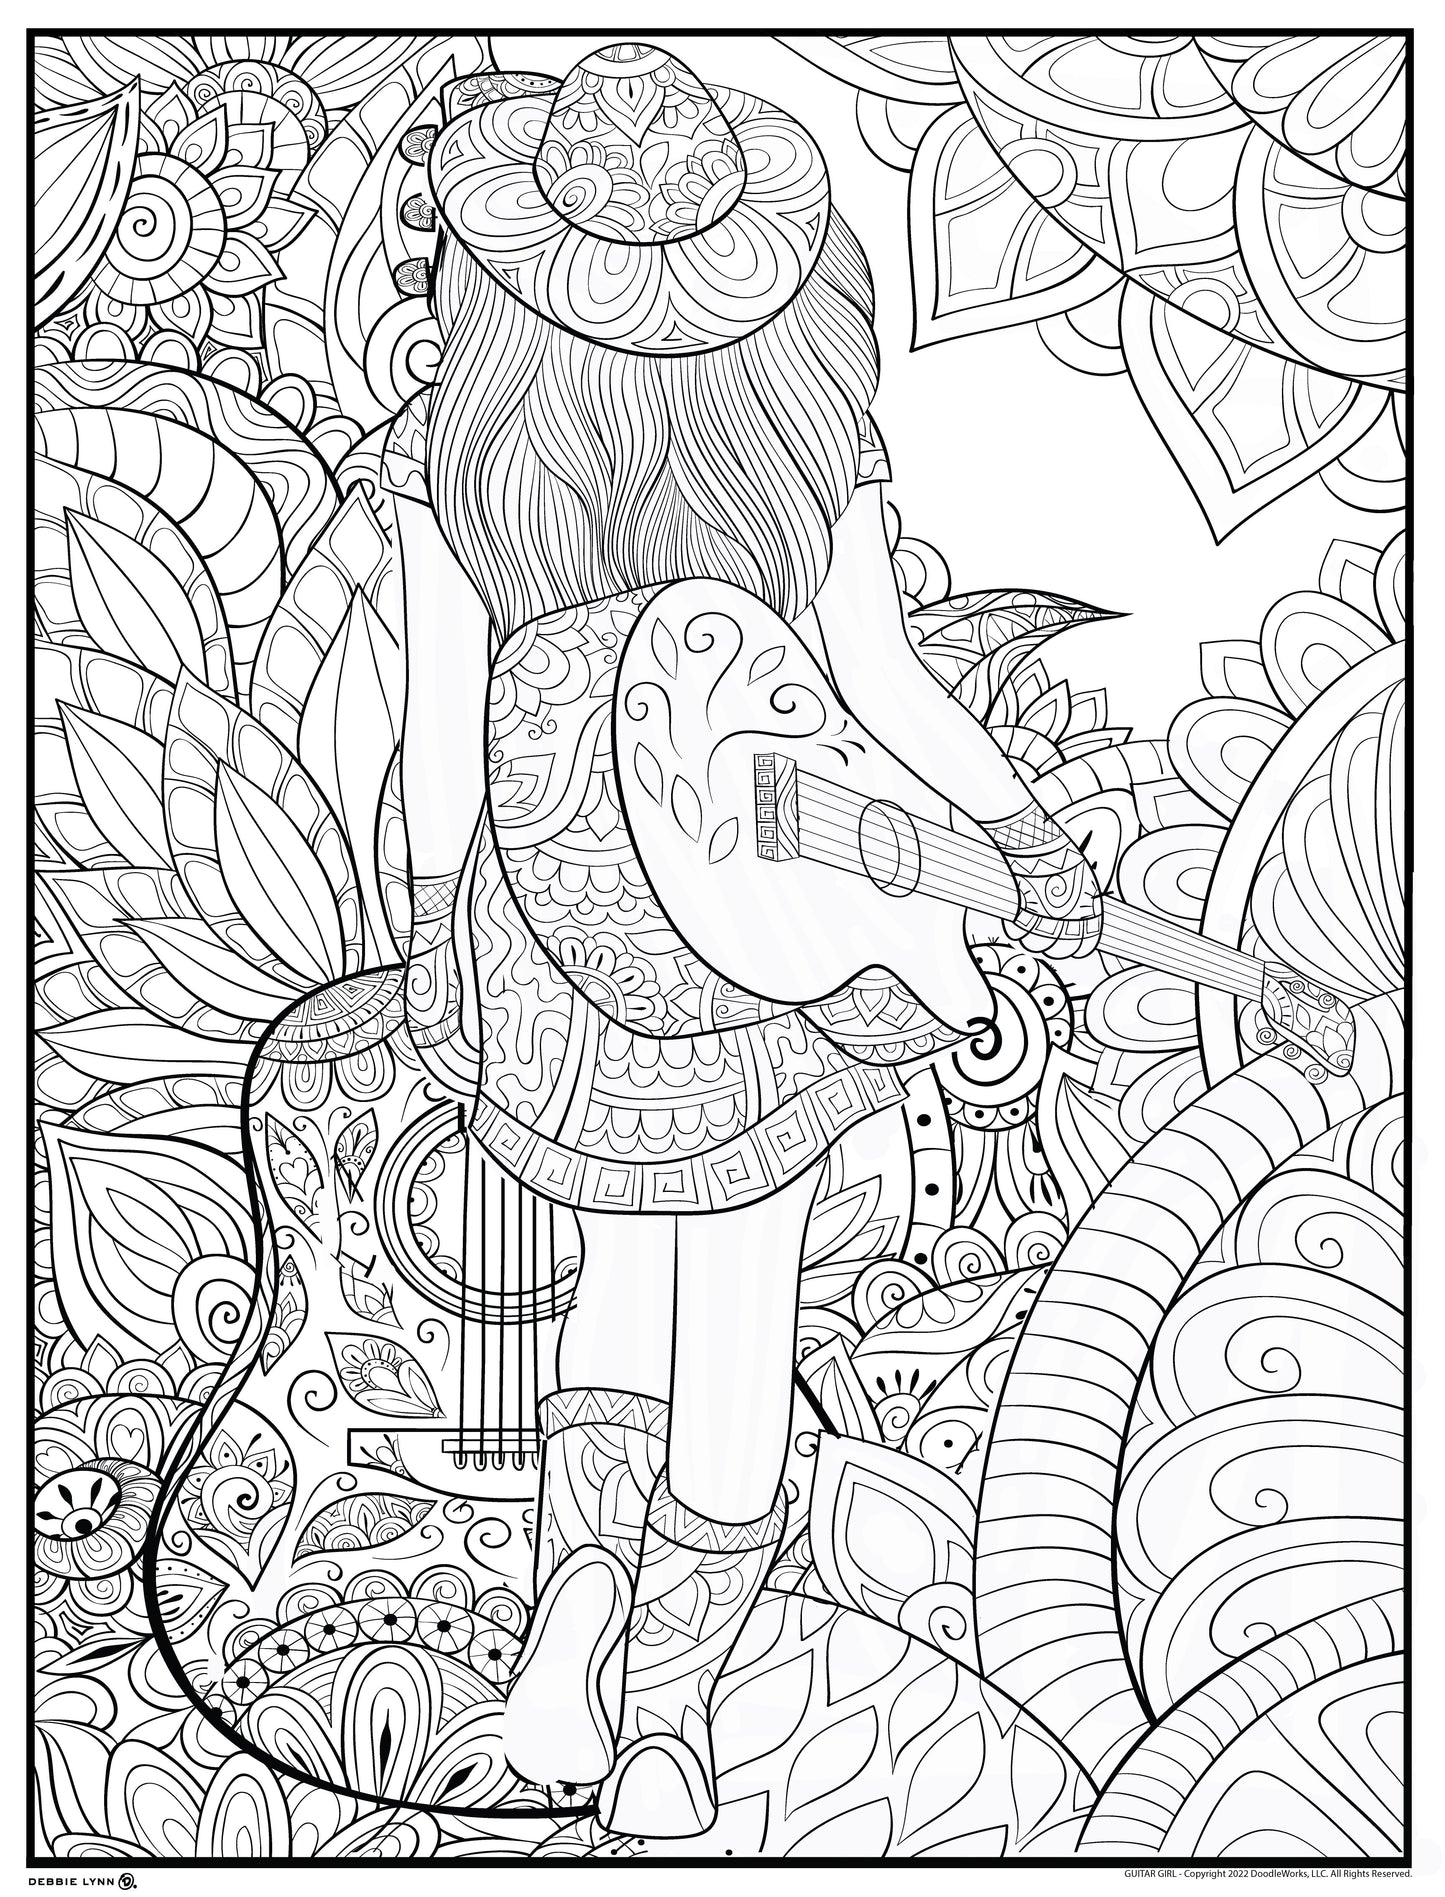 Guitar Girl Personalized Giant Coloring Poster 46"x60"